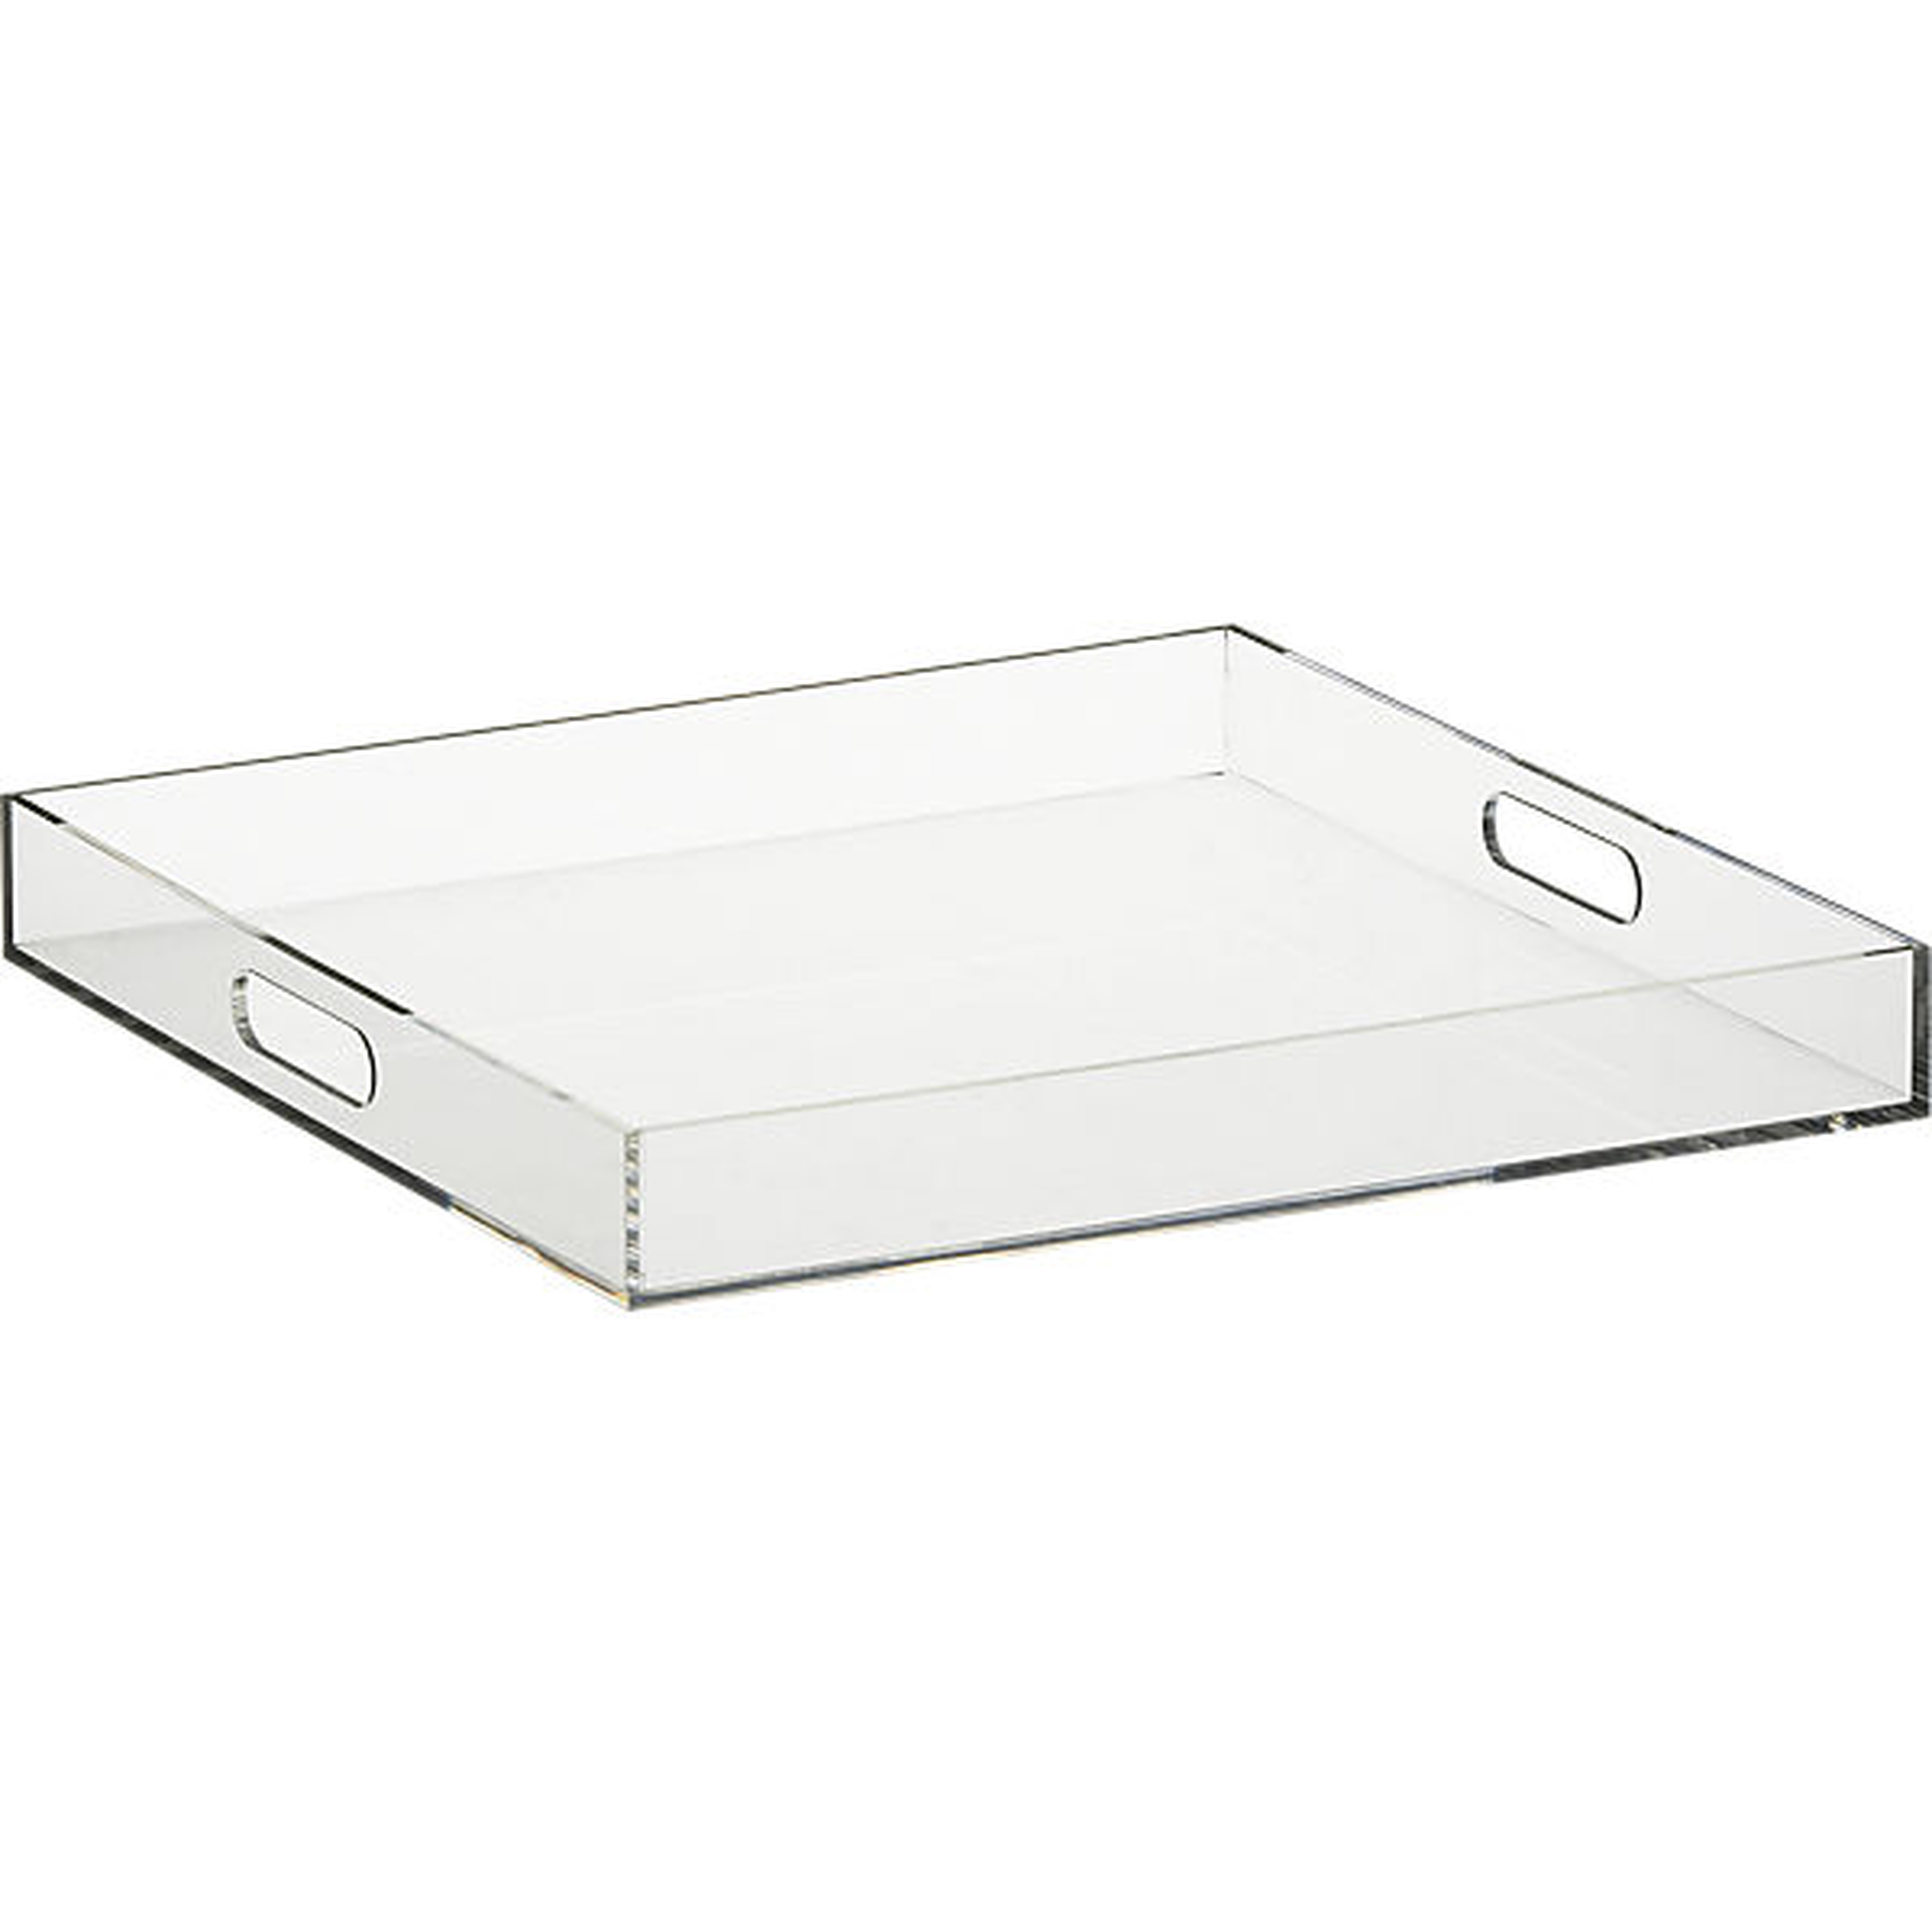 Format clear square tray - CB2